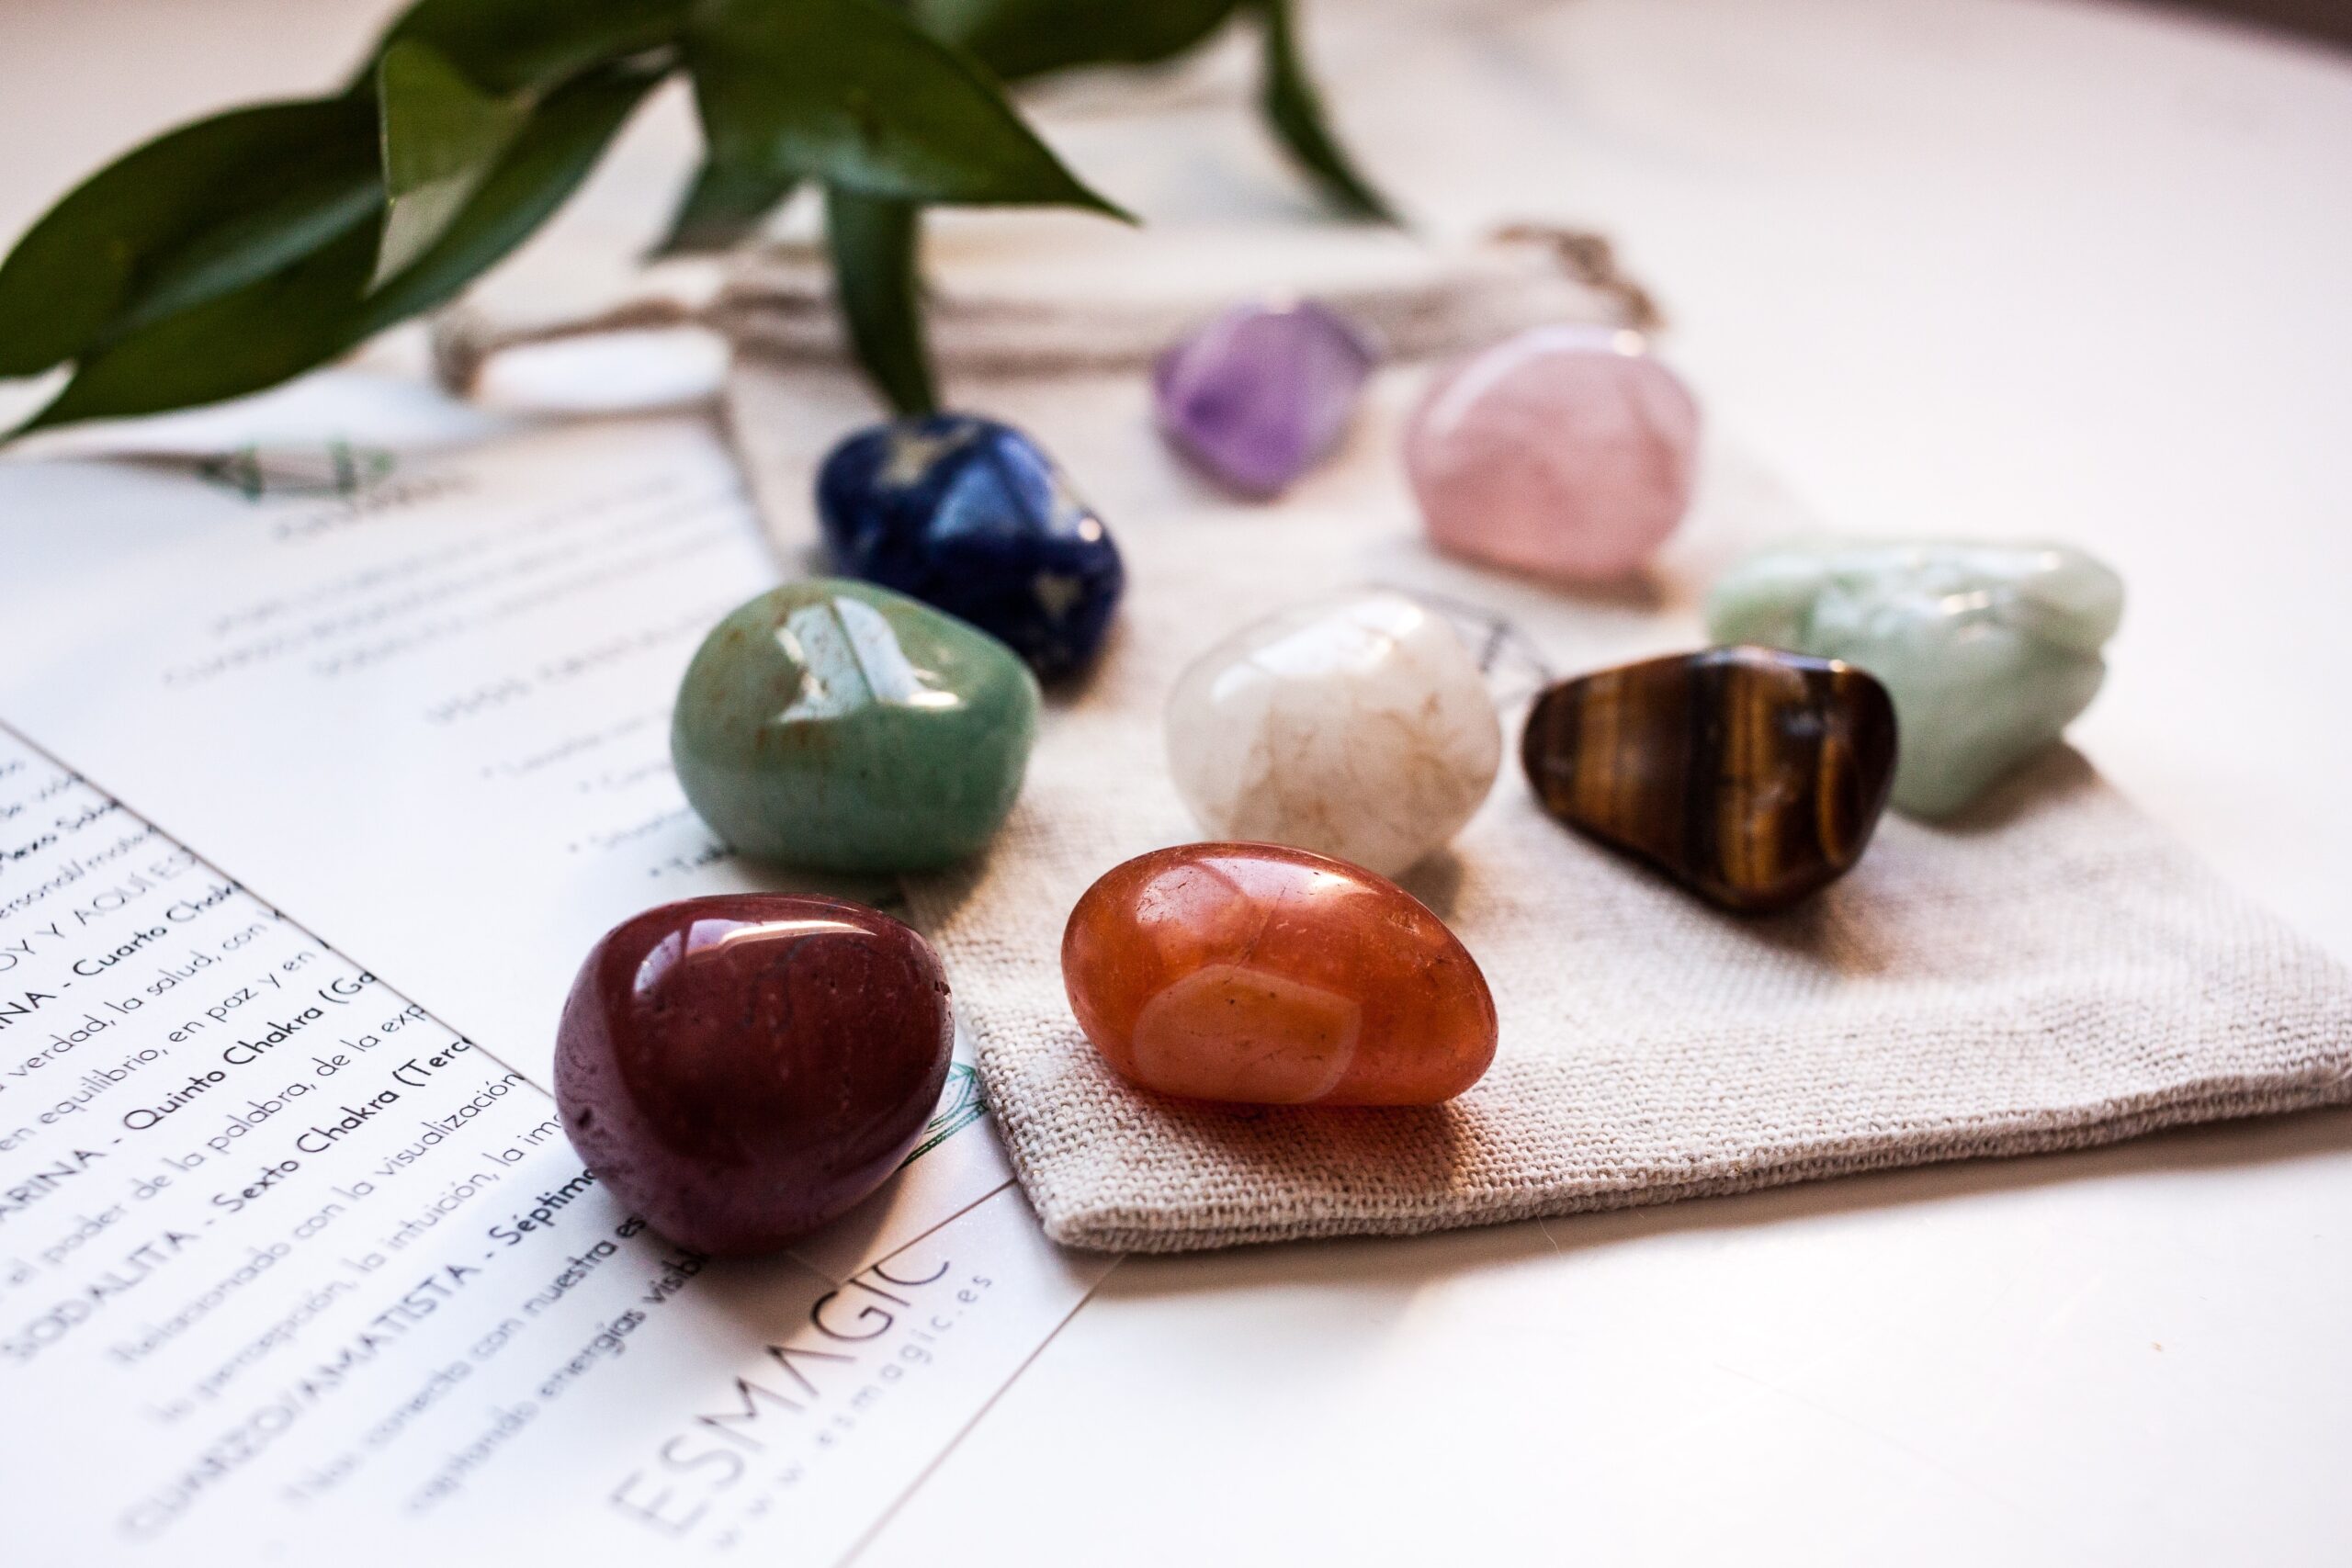 A bag with a variety of stones and a plant on it.